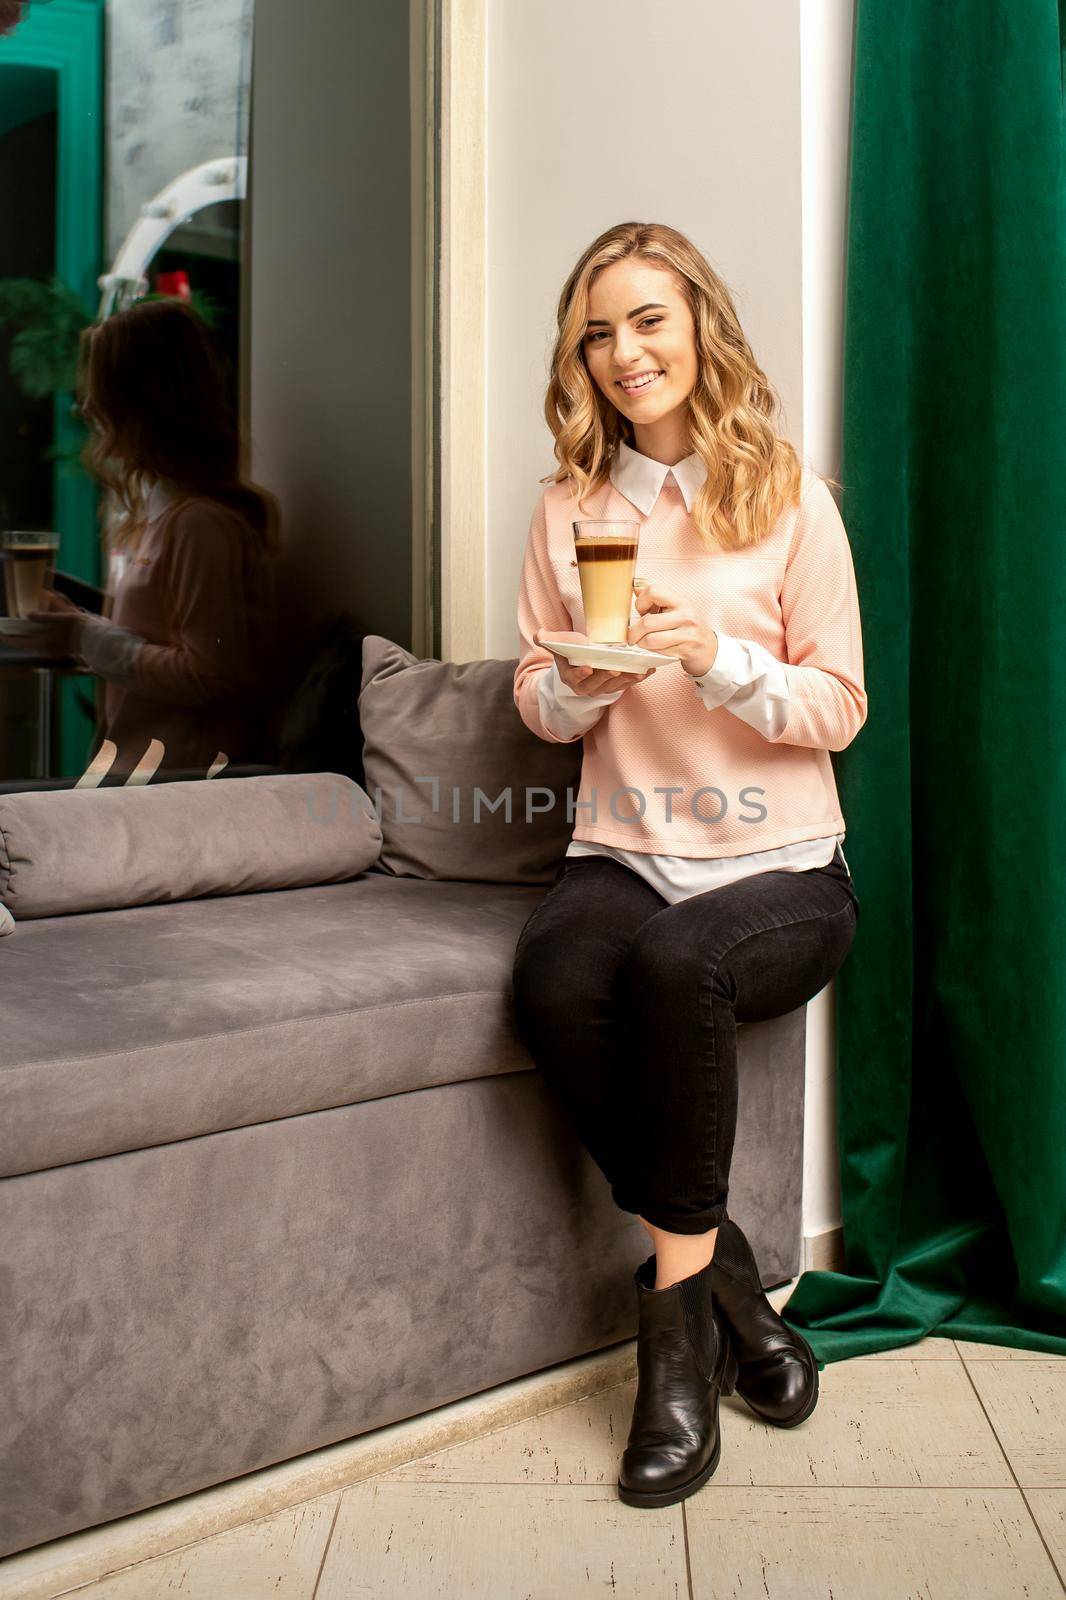 Beautiful caucasian young smiling woman with long wavy blonde hair holding and drinking a latte from a glass cup, sitting on a sofa. by okskukuruza